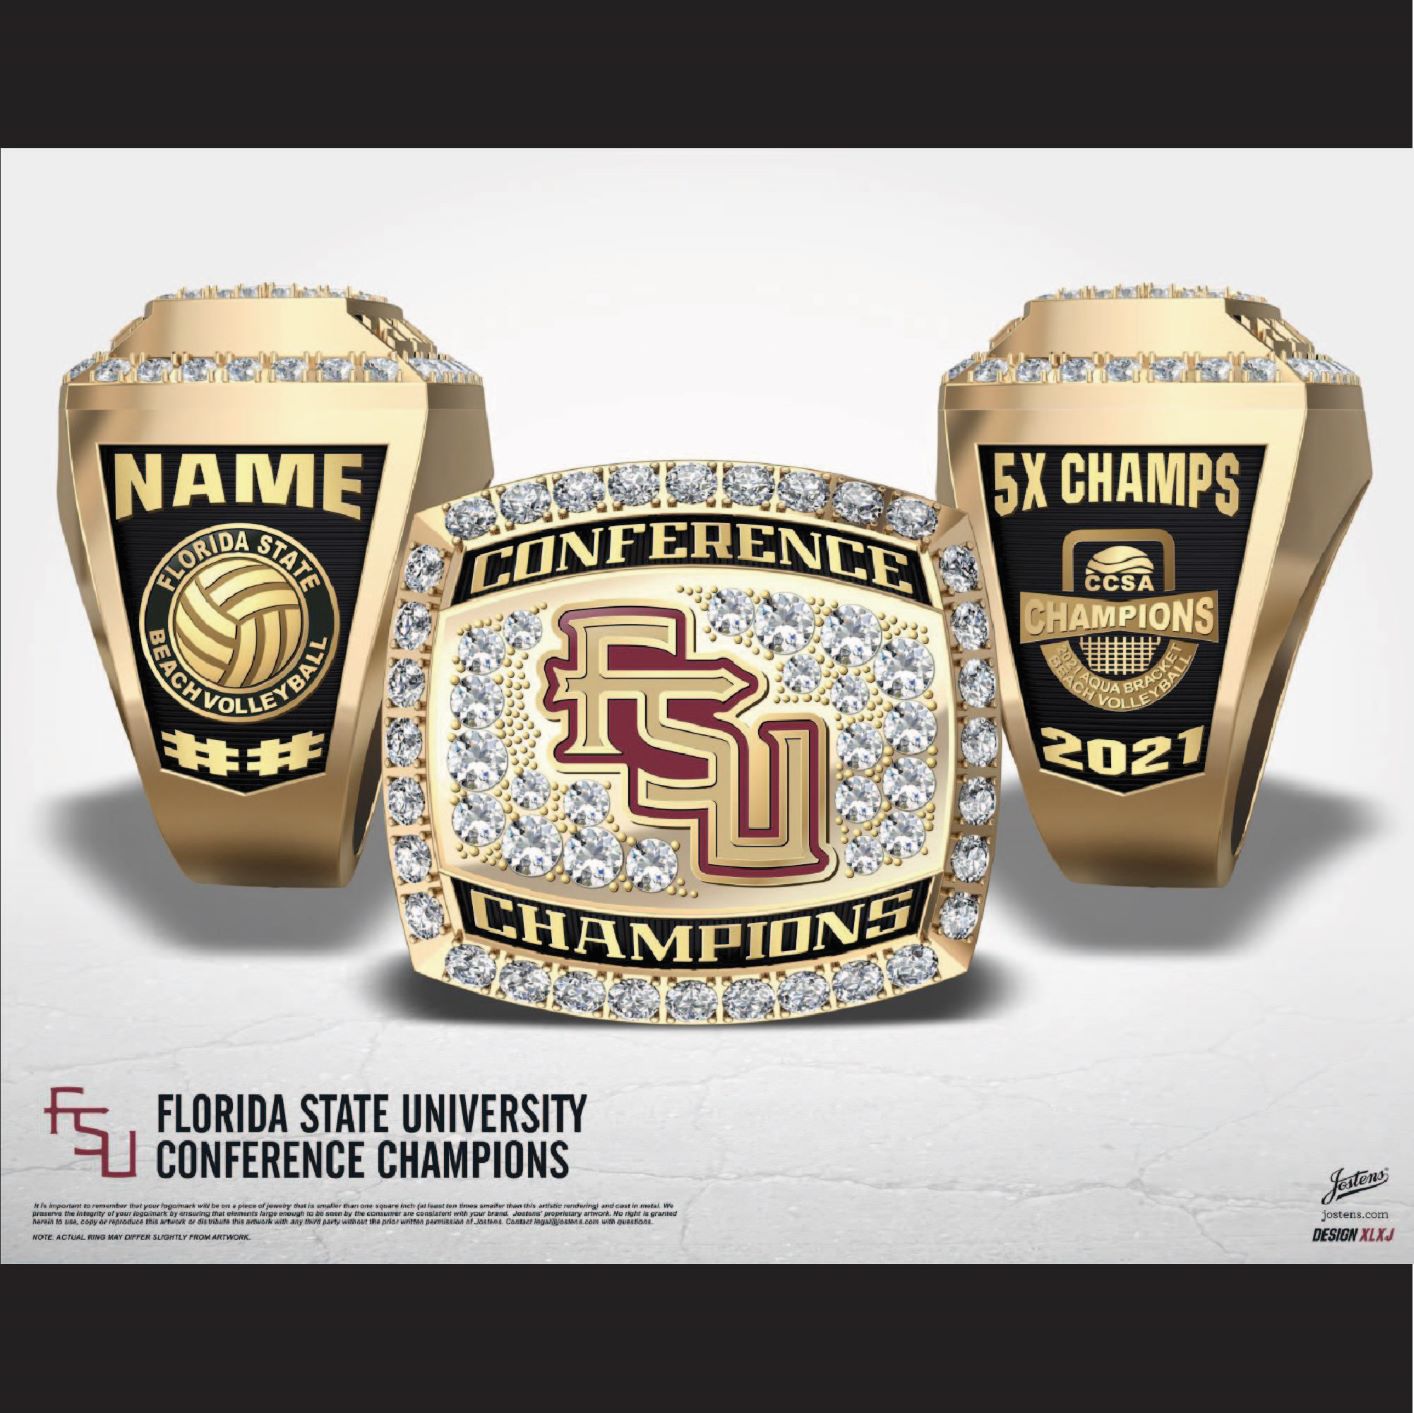 Florida State University Women's Beach Volleyball 2021 Conference Championship Ring